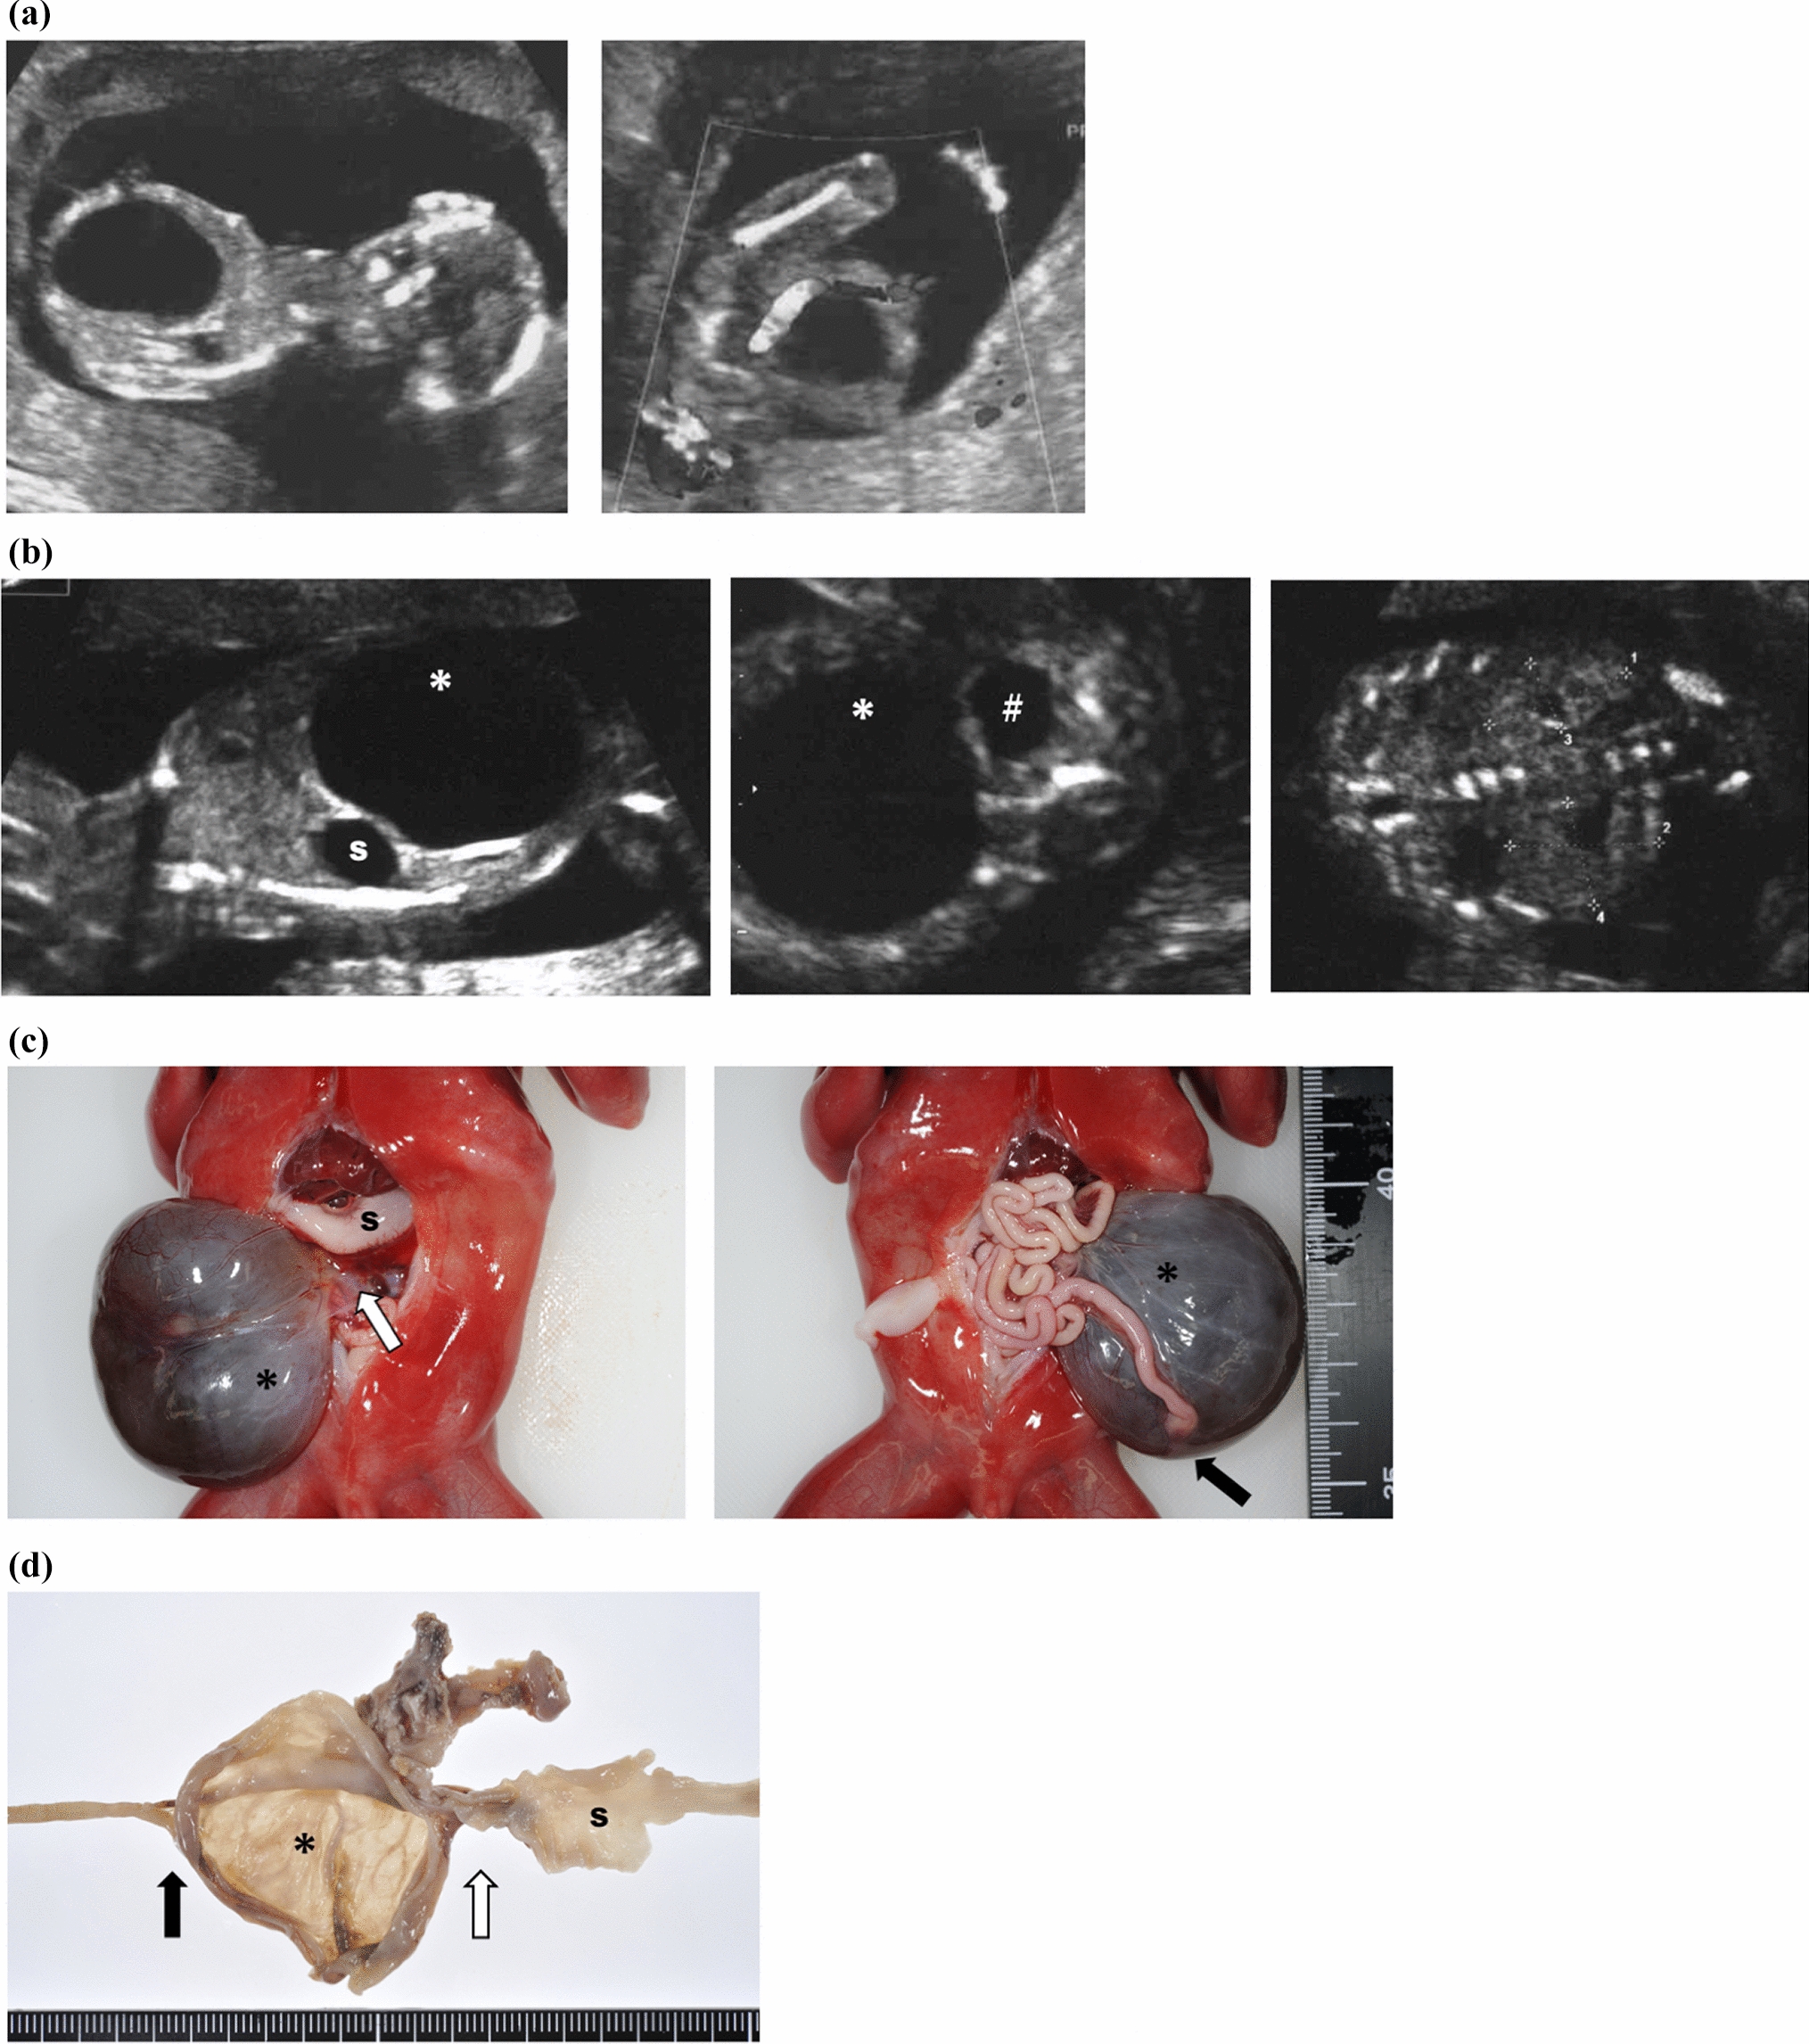 A case of fetal duodenal atresia suspected to be lower urinary tract obstruction